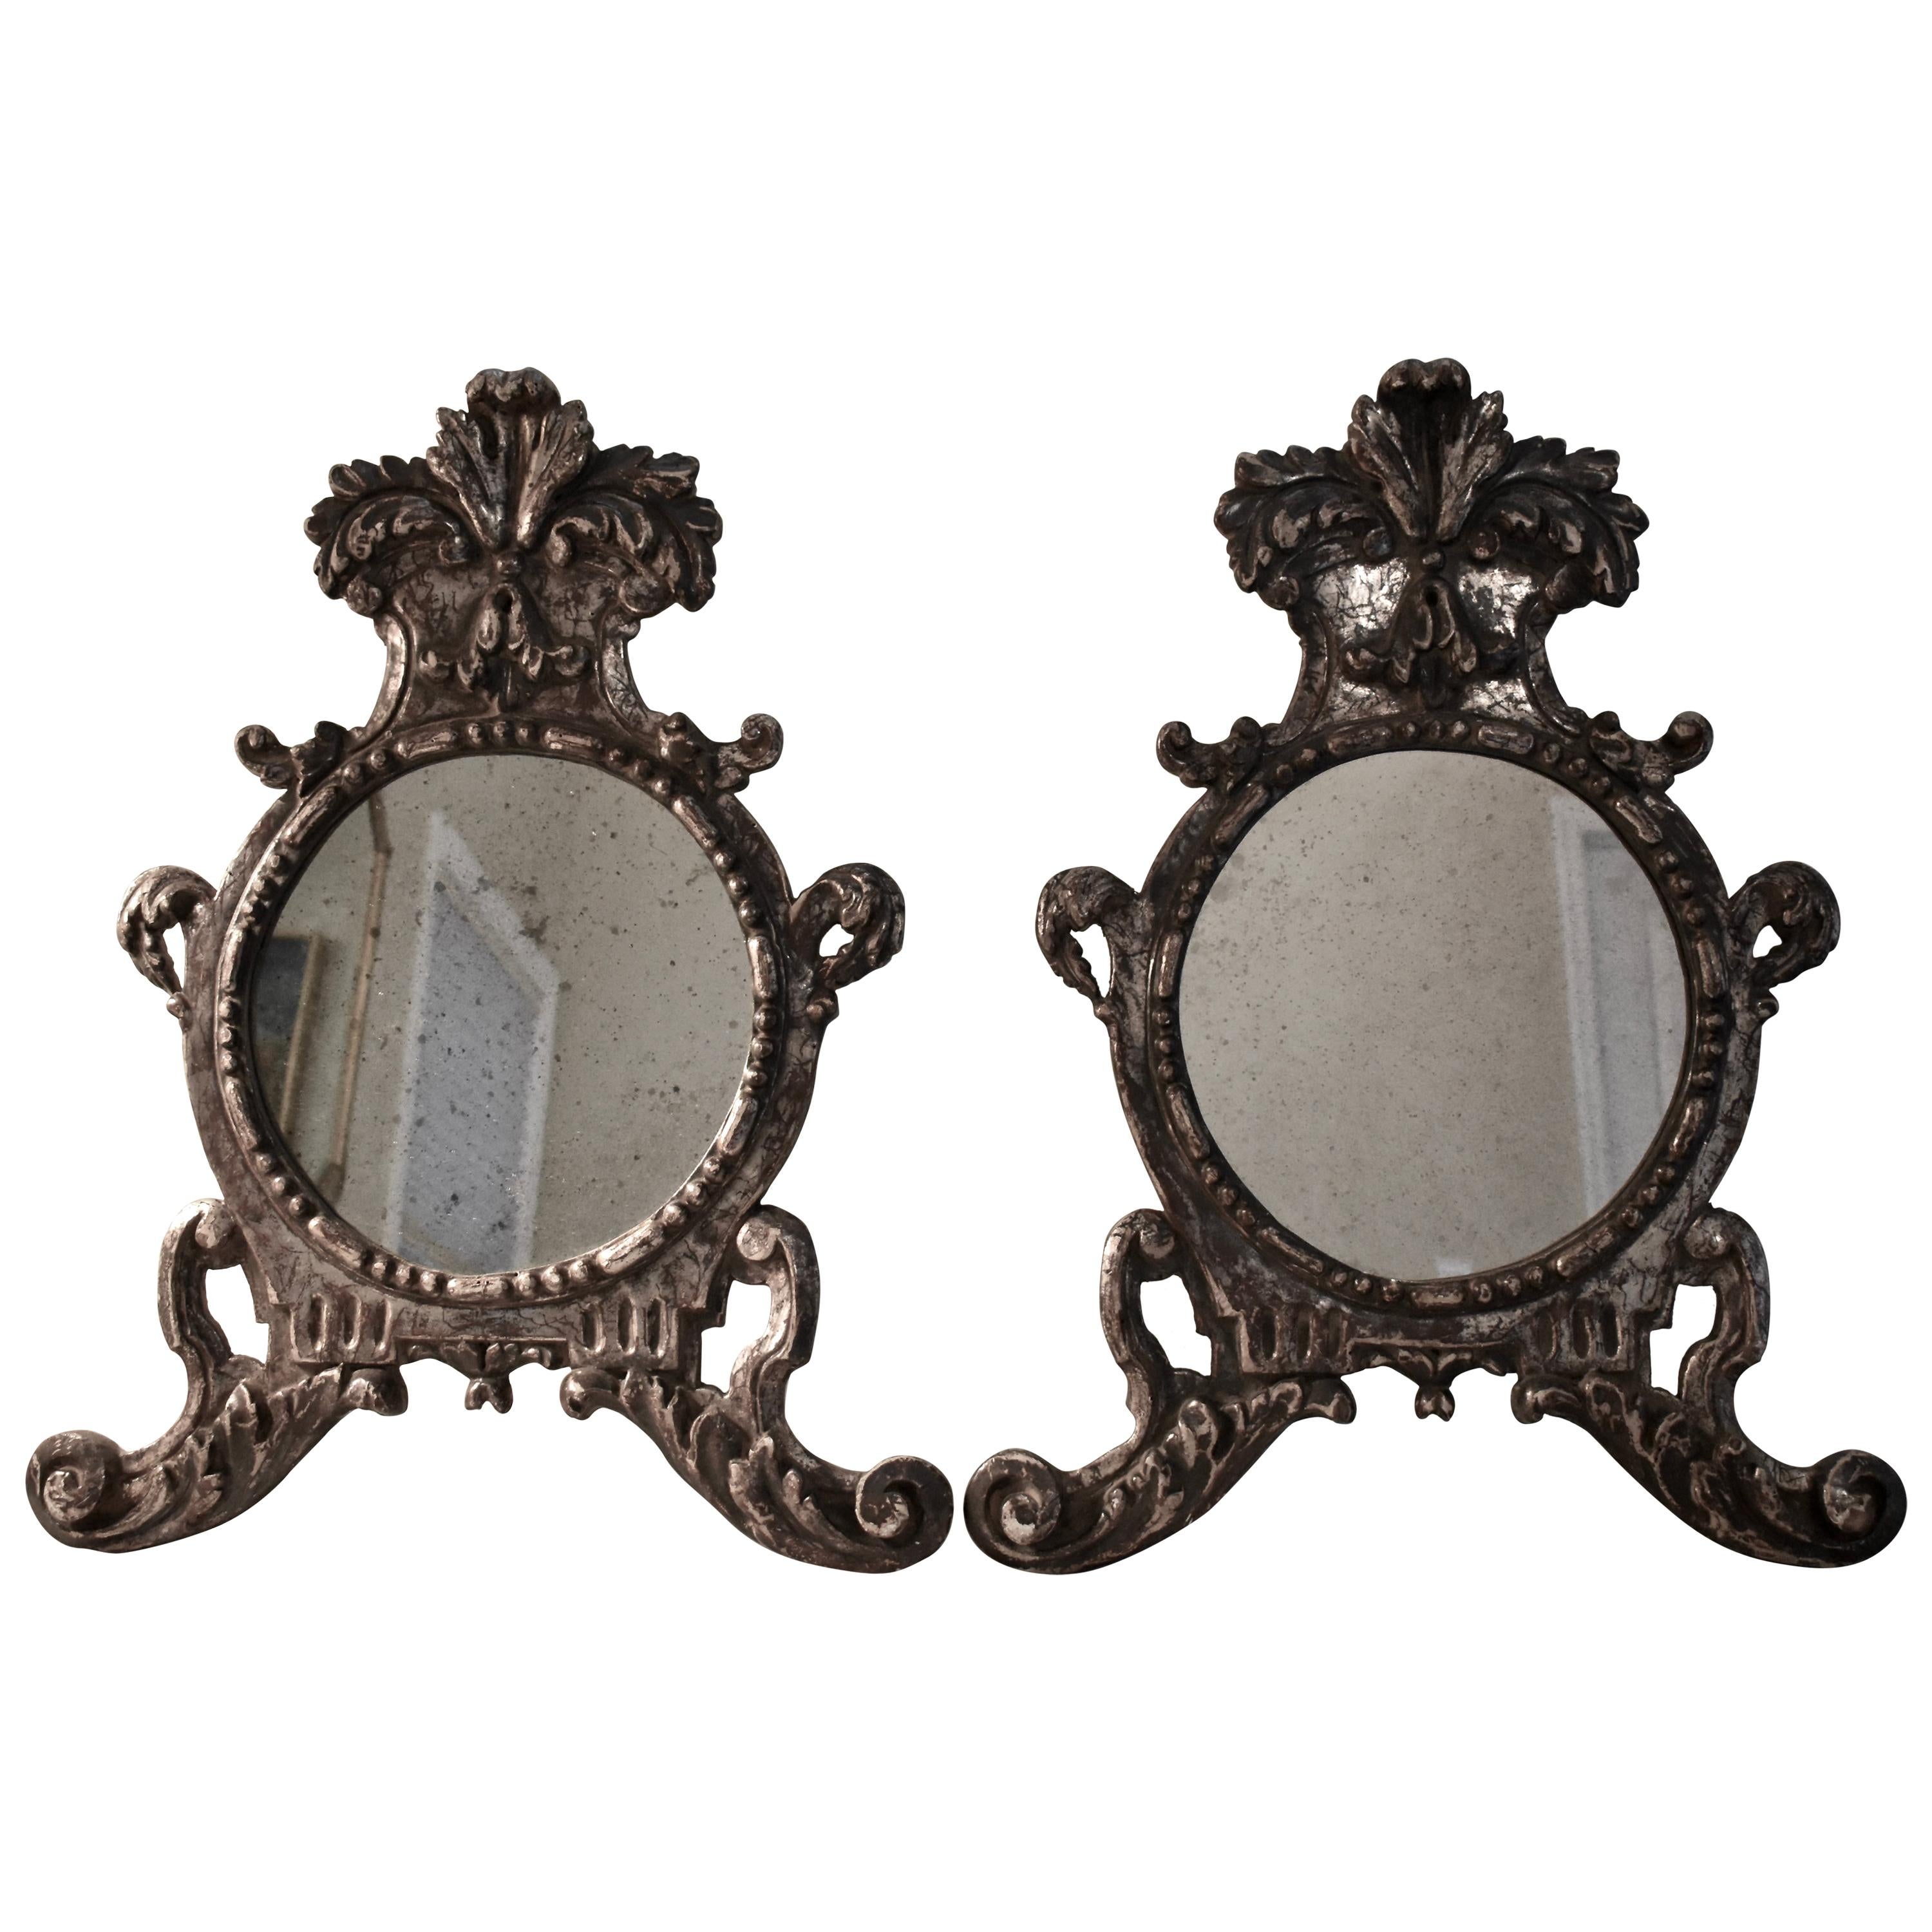 Italian Silver-Gilt Crested and Footed Baroque Revival Wall Mirrors, Pair For Sale 10